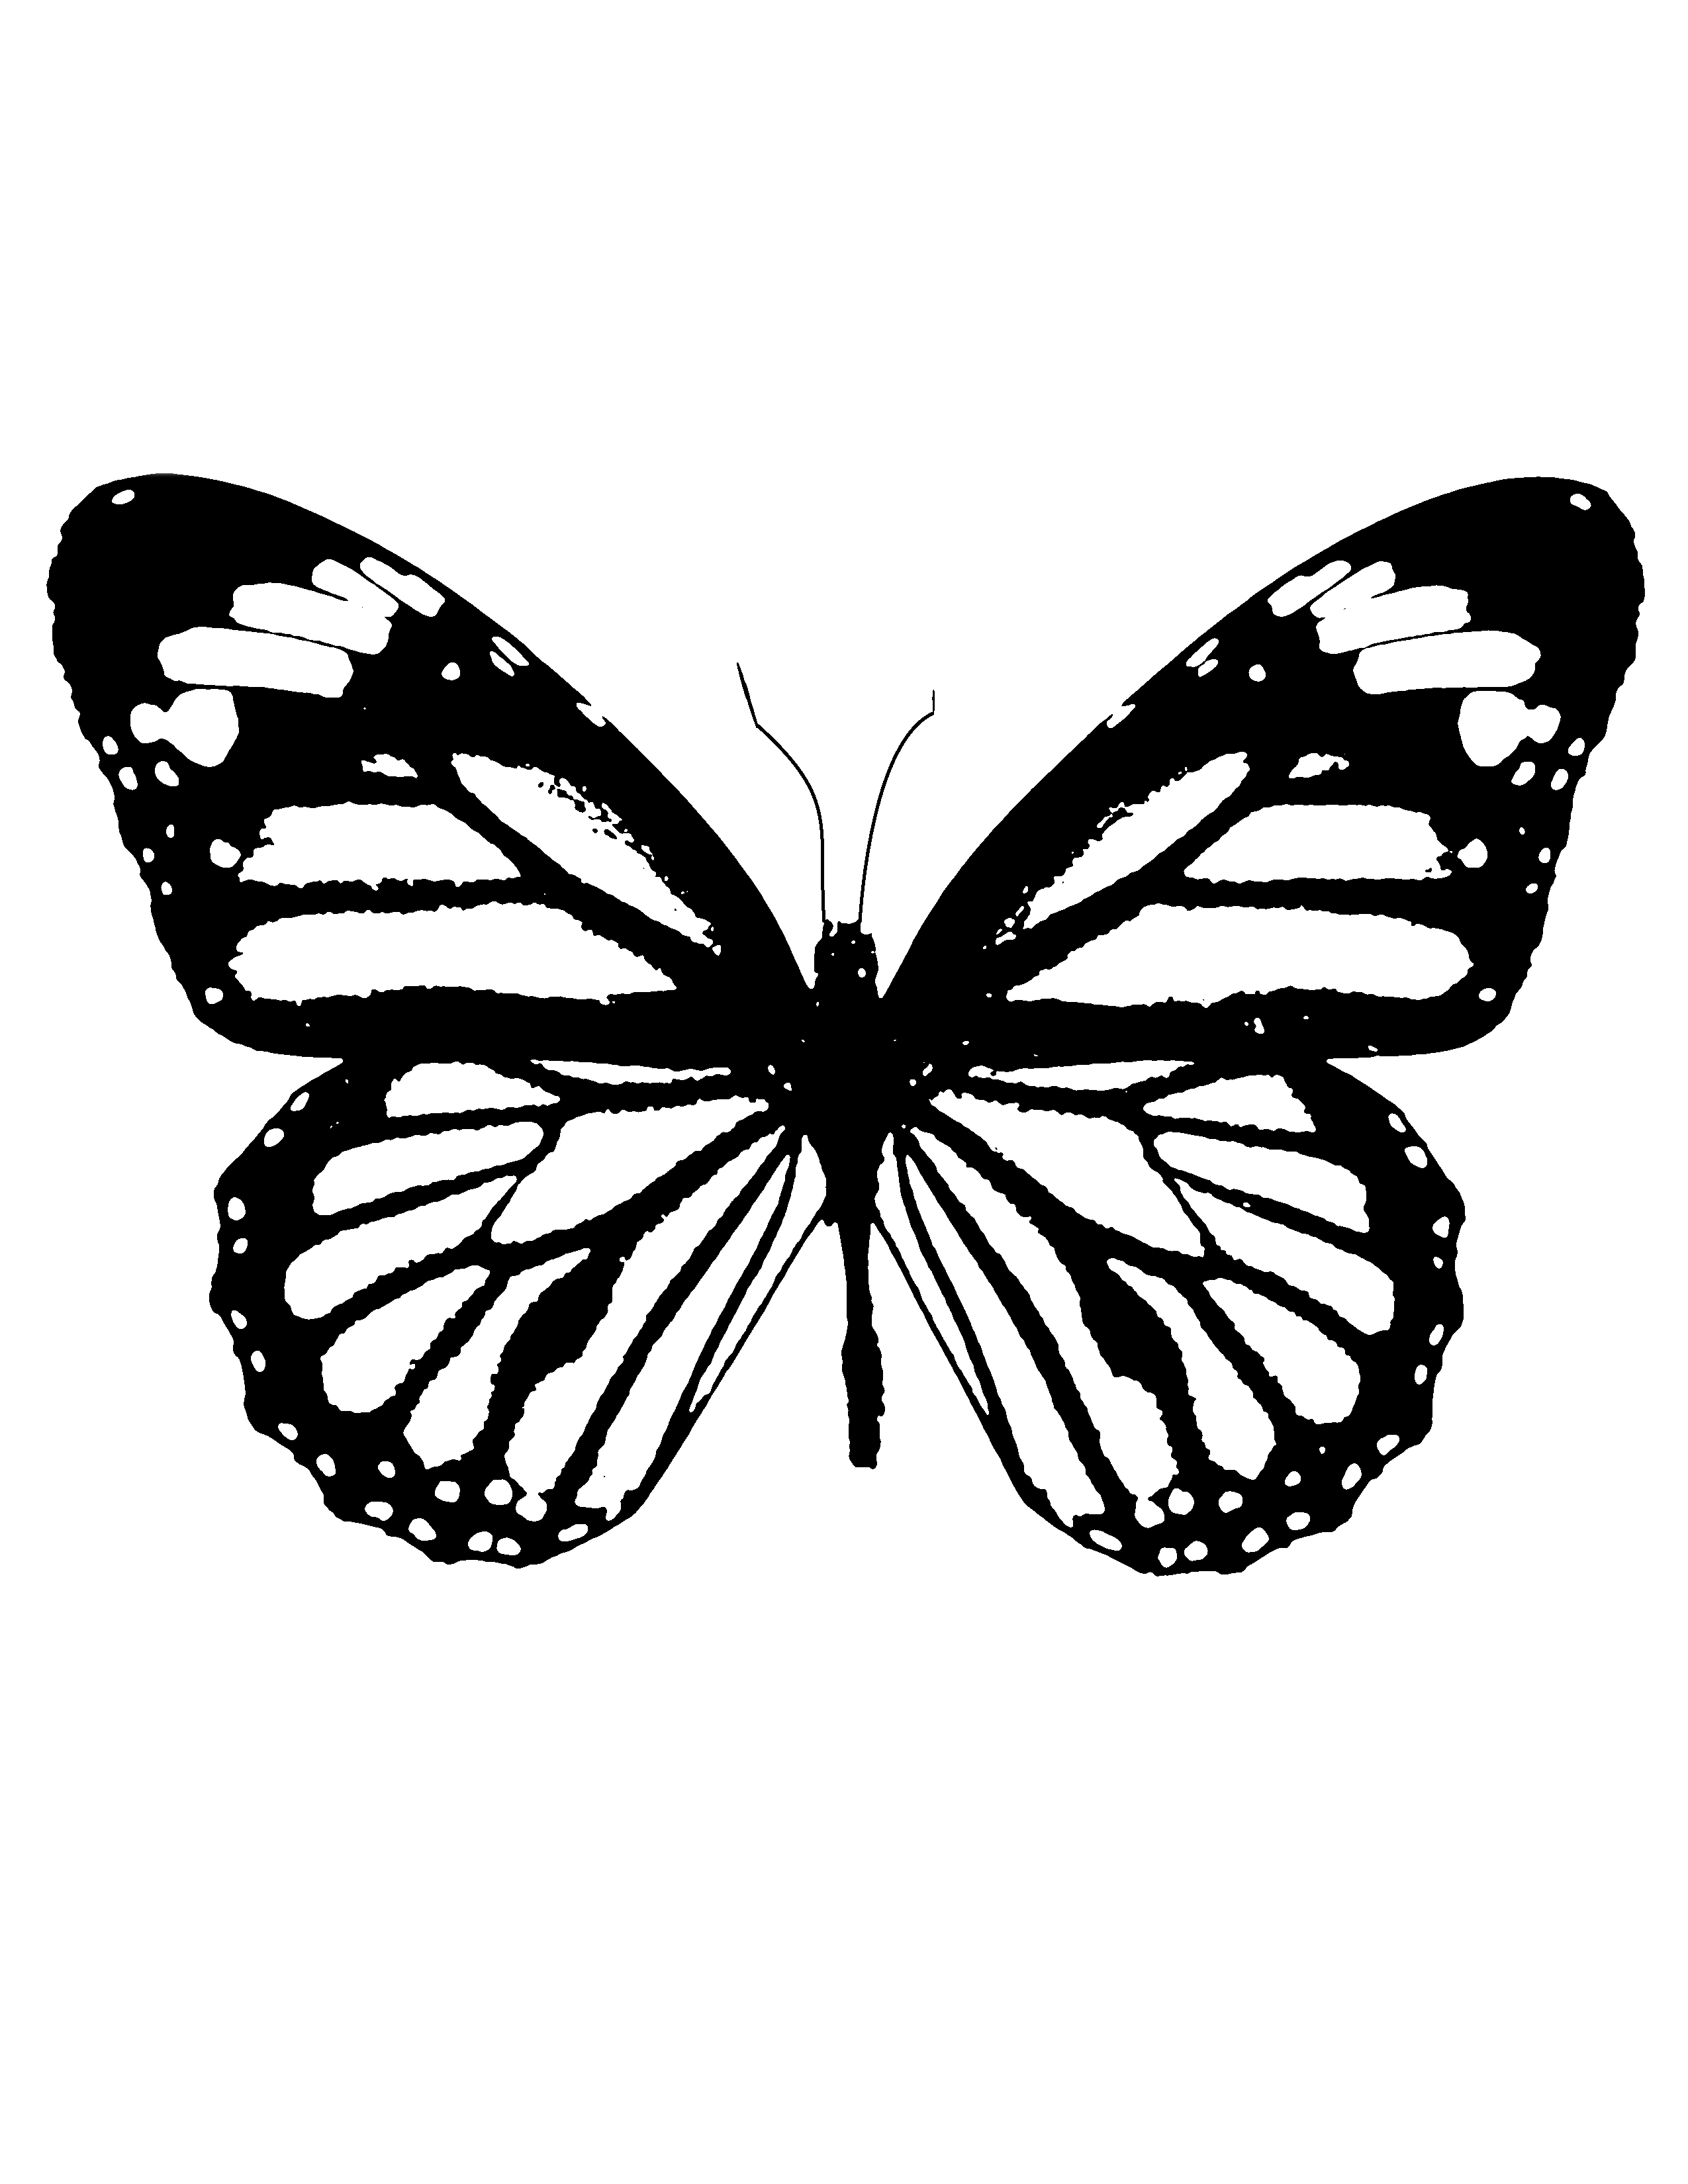 Butterfly Tattoo Stencil Arm Tattoo Sites Explore what was found for the papillon clipart cute butterfly outlinefree stencils printable cut outbutterfly simple butterfly tattoo butterfly sketch butterfly outline coloring books coloring pages animal. butterfly tattoo stencil arm tattoo sites